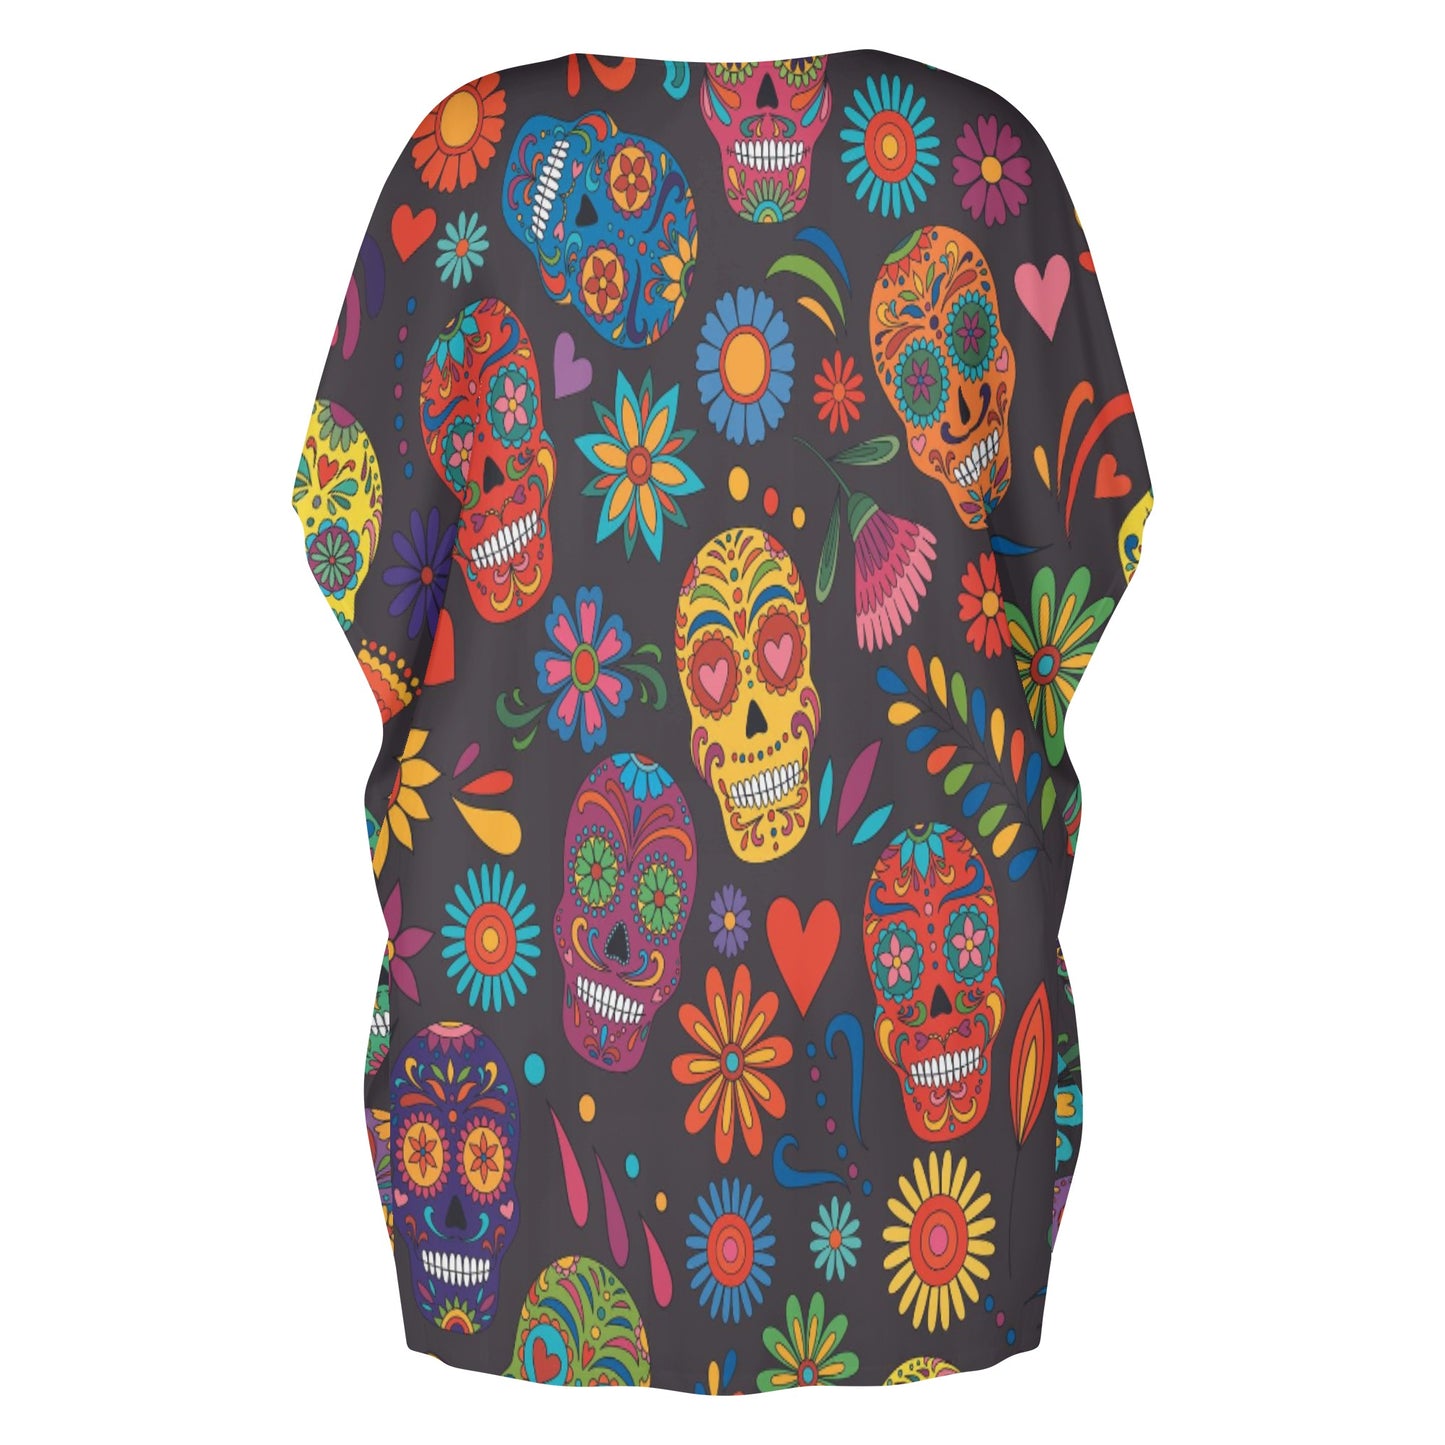 Sugar skull day of the dead mexican skull Women's Daily Plus Size Loose Dress